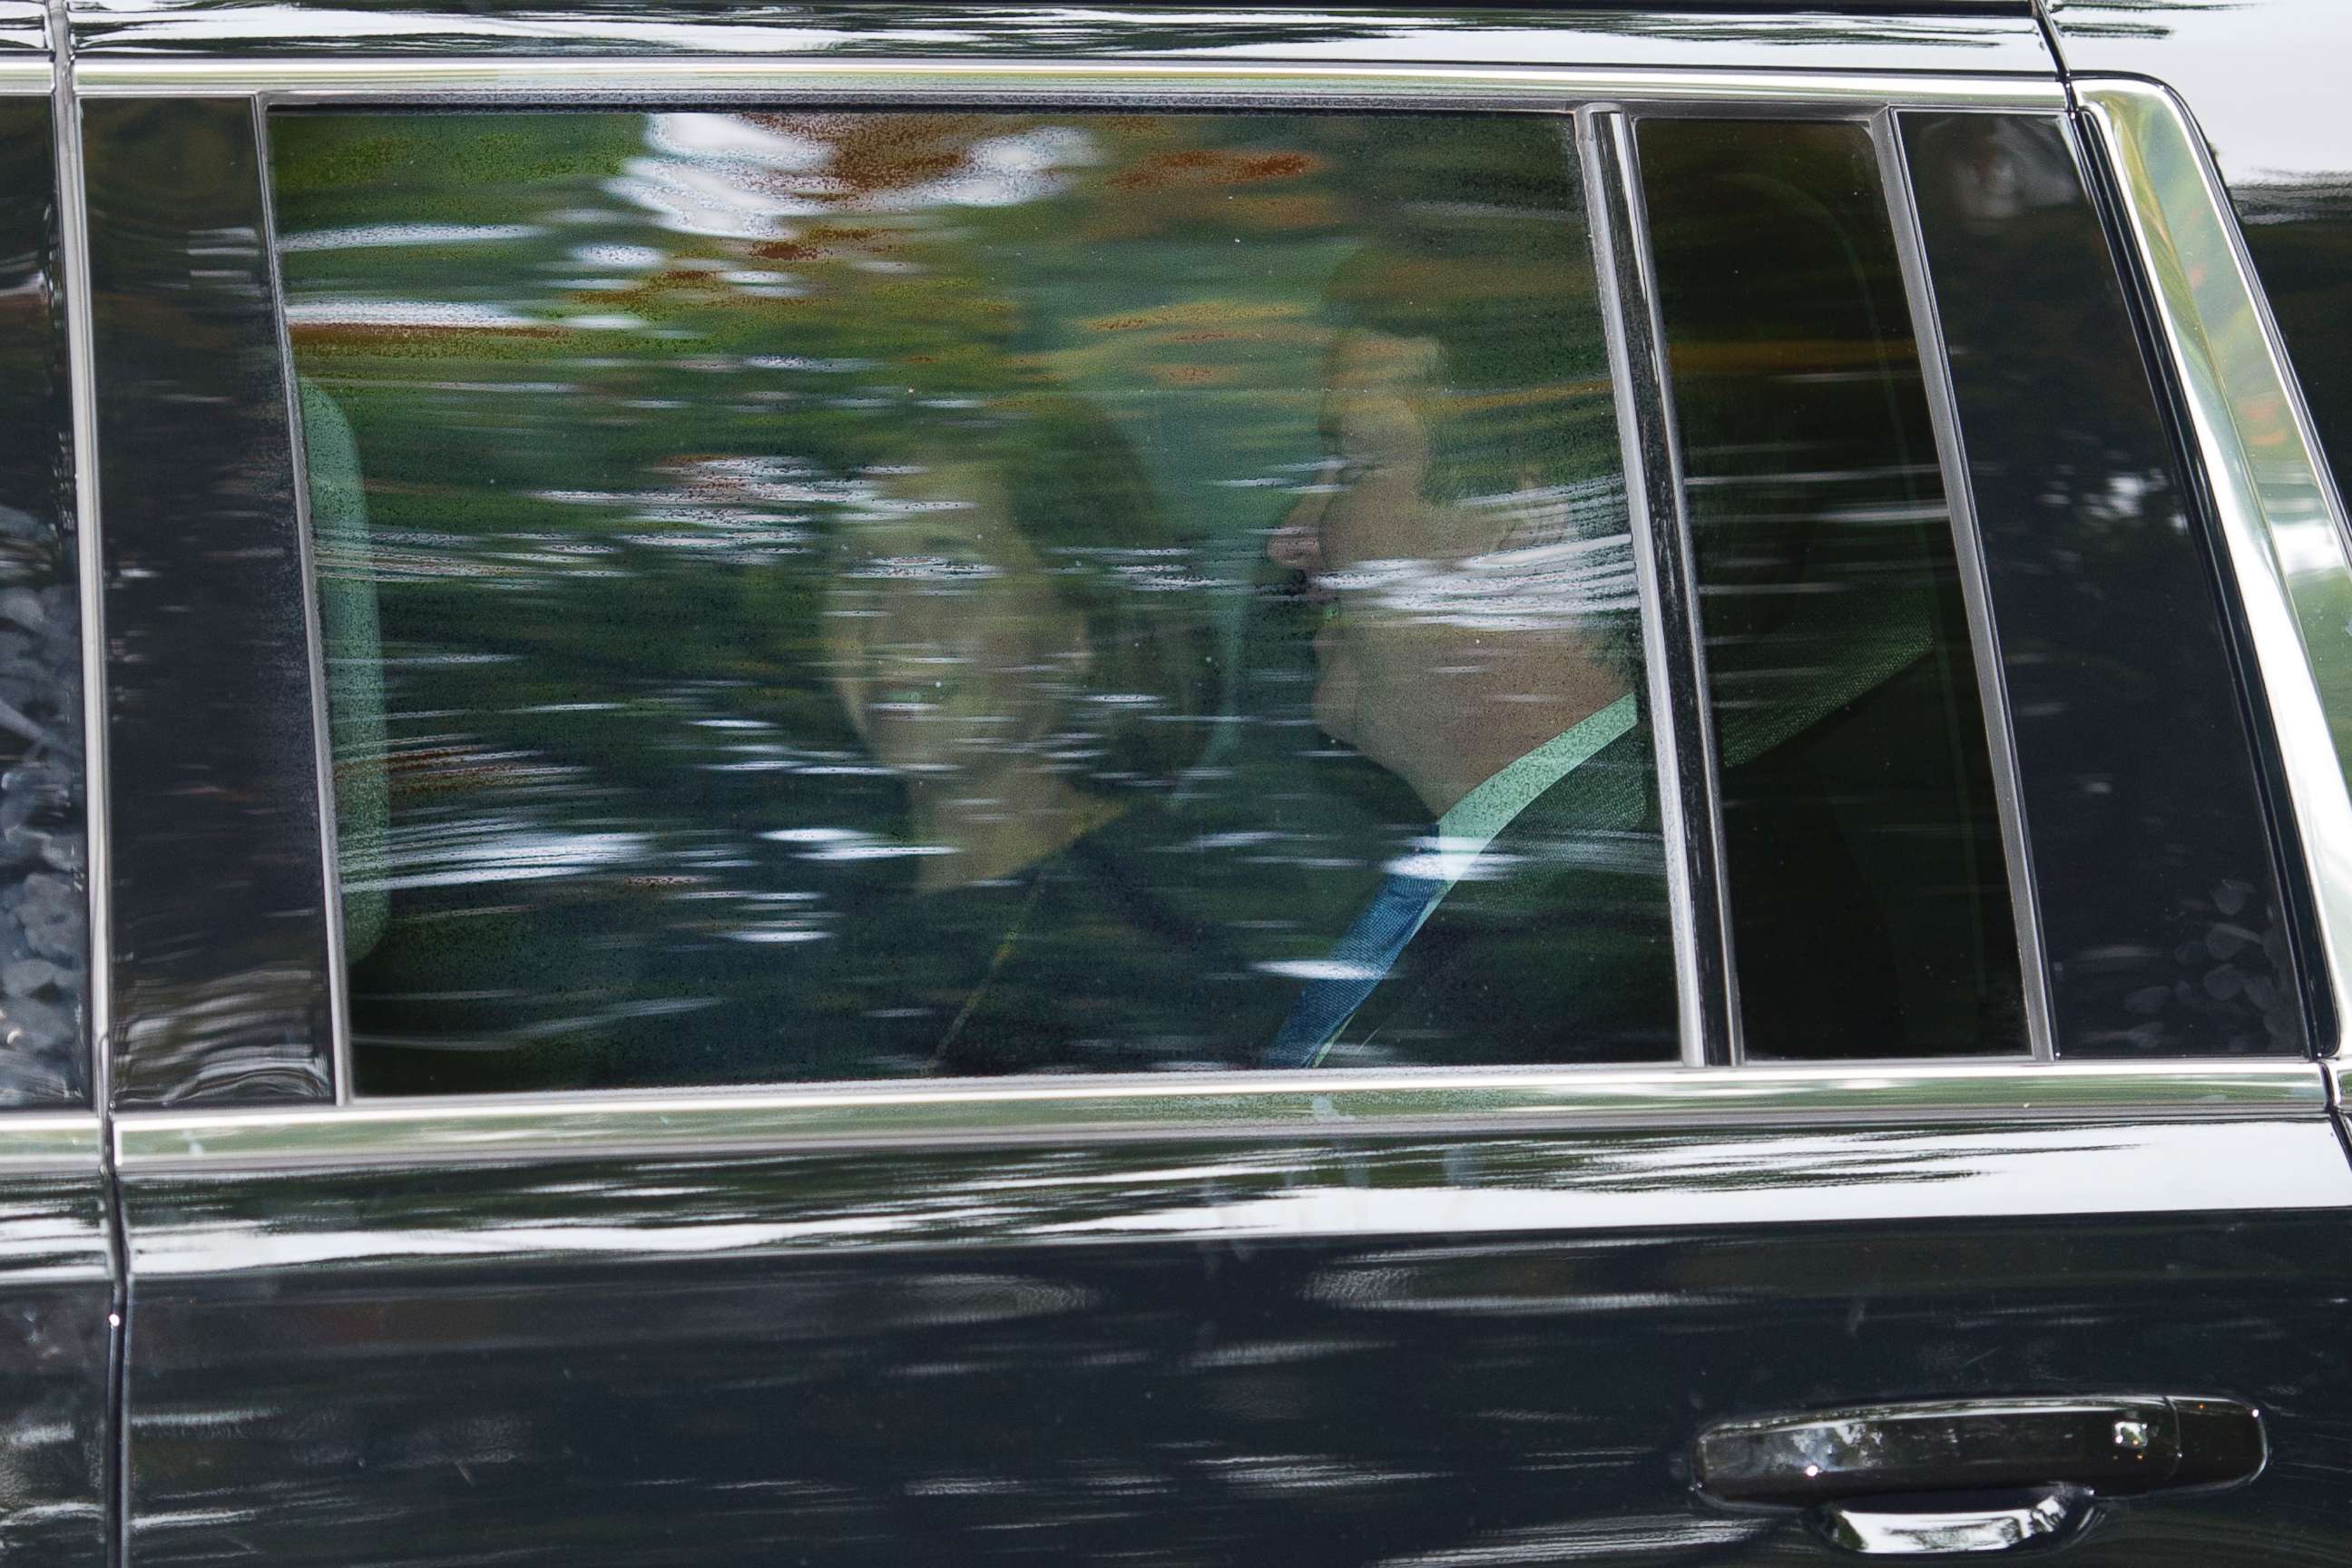 PHOTO: Supreme Court nominee Brett Kavanaugh and his wife Ashley Estes Kavanaugh depart their home in Chevy Chase, Md., en route to the Supreme Court, Oct. 6, 2018.